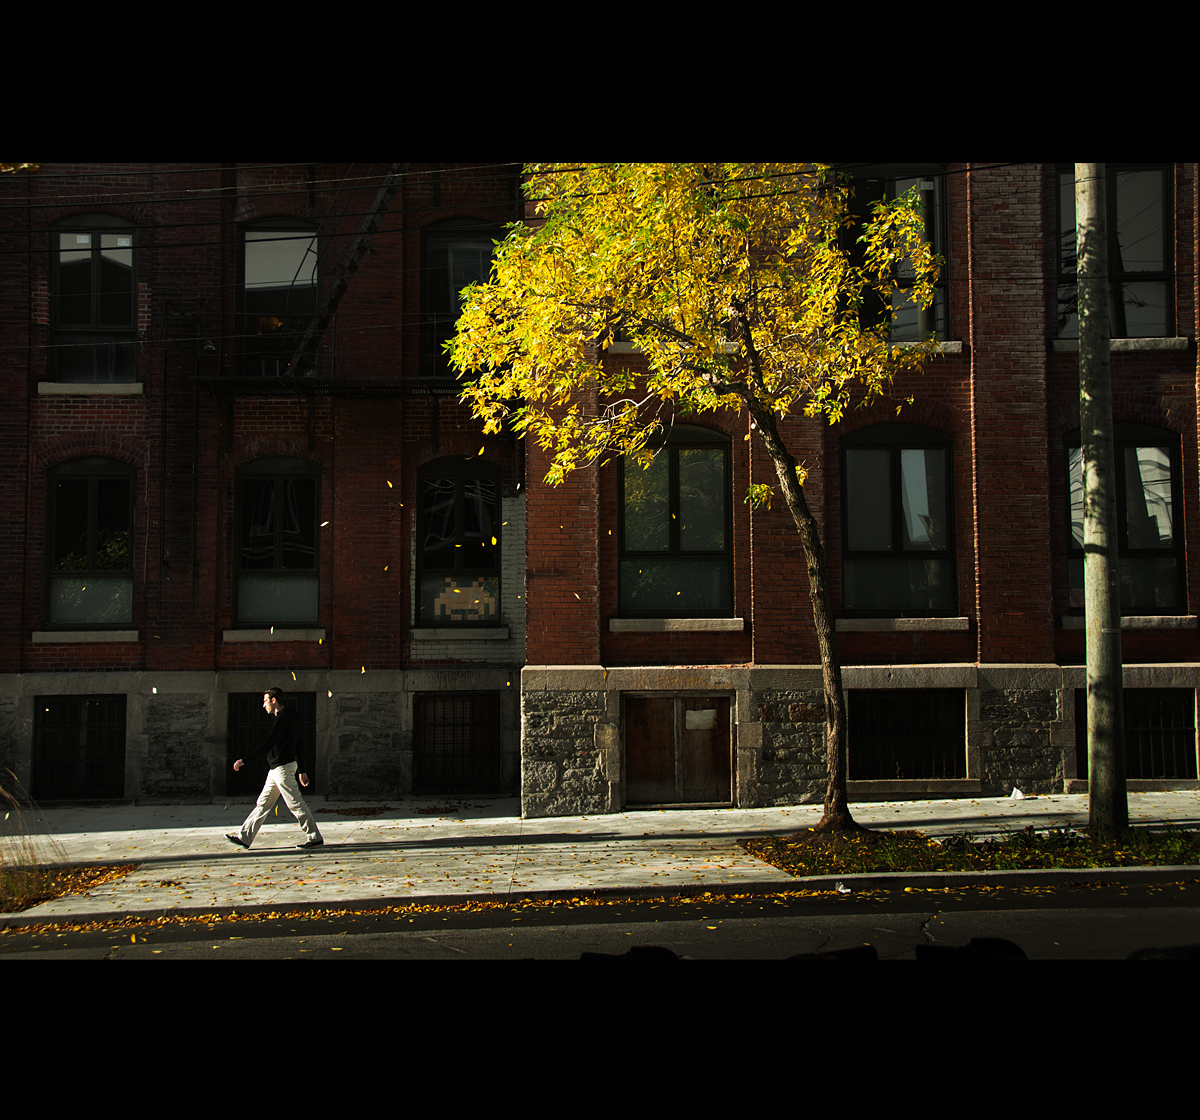 Montreal "early sunday morning" "julien coquentin" Quebec Canada Street rain seasons winter snow autumn city